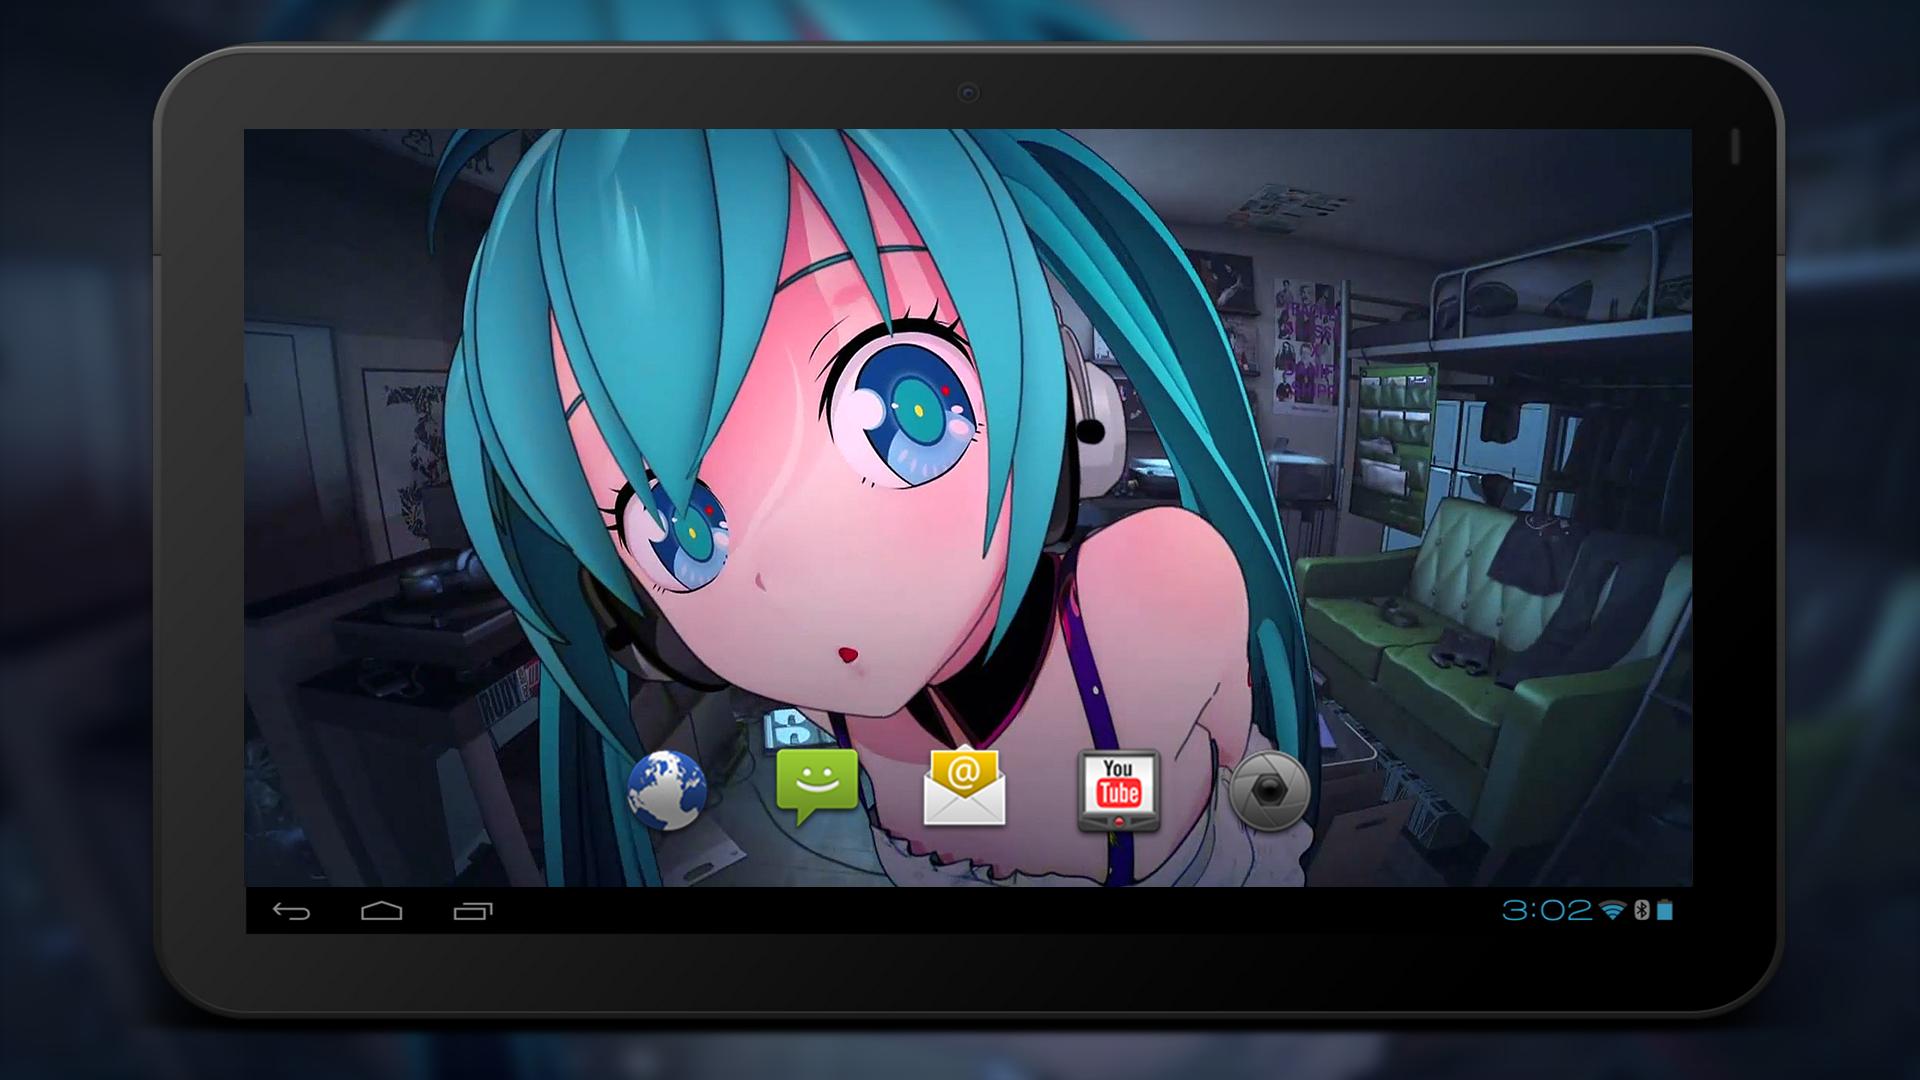 Hatsune Miku Live Wallpaper For Android Apk Download